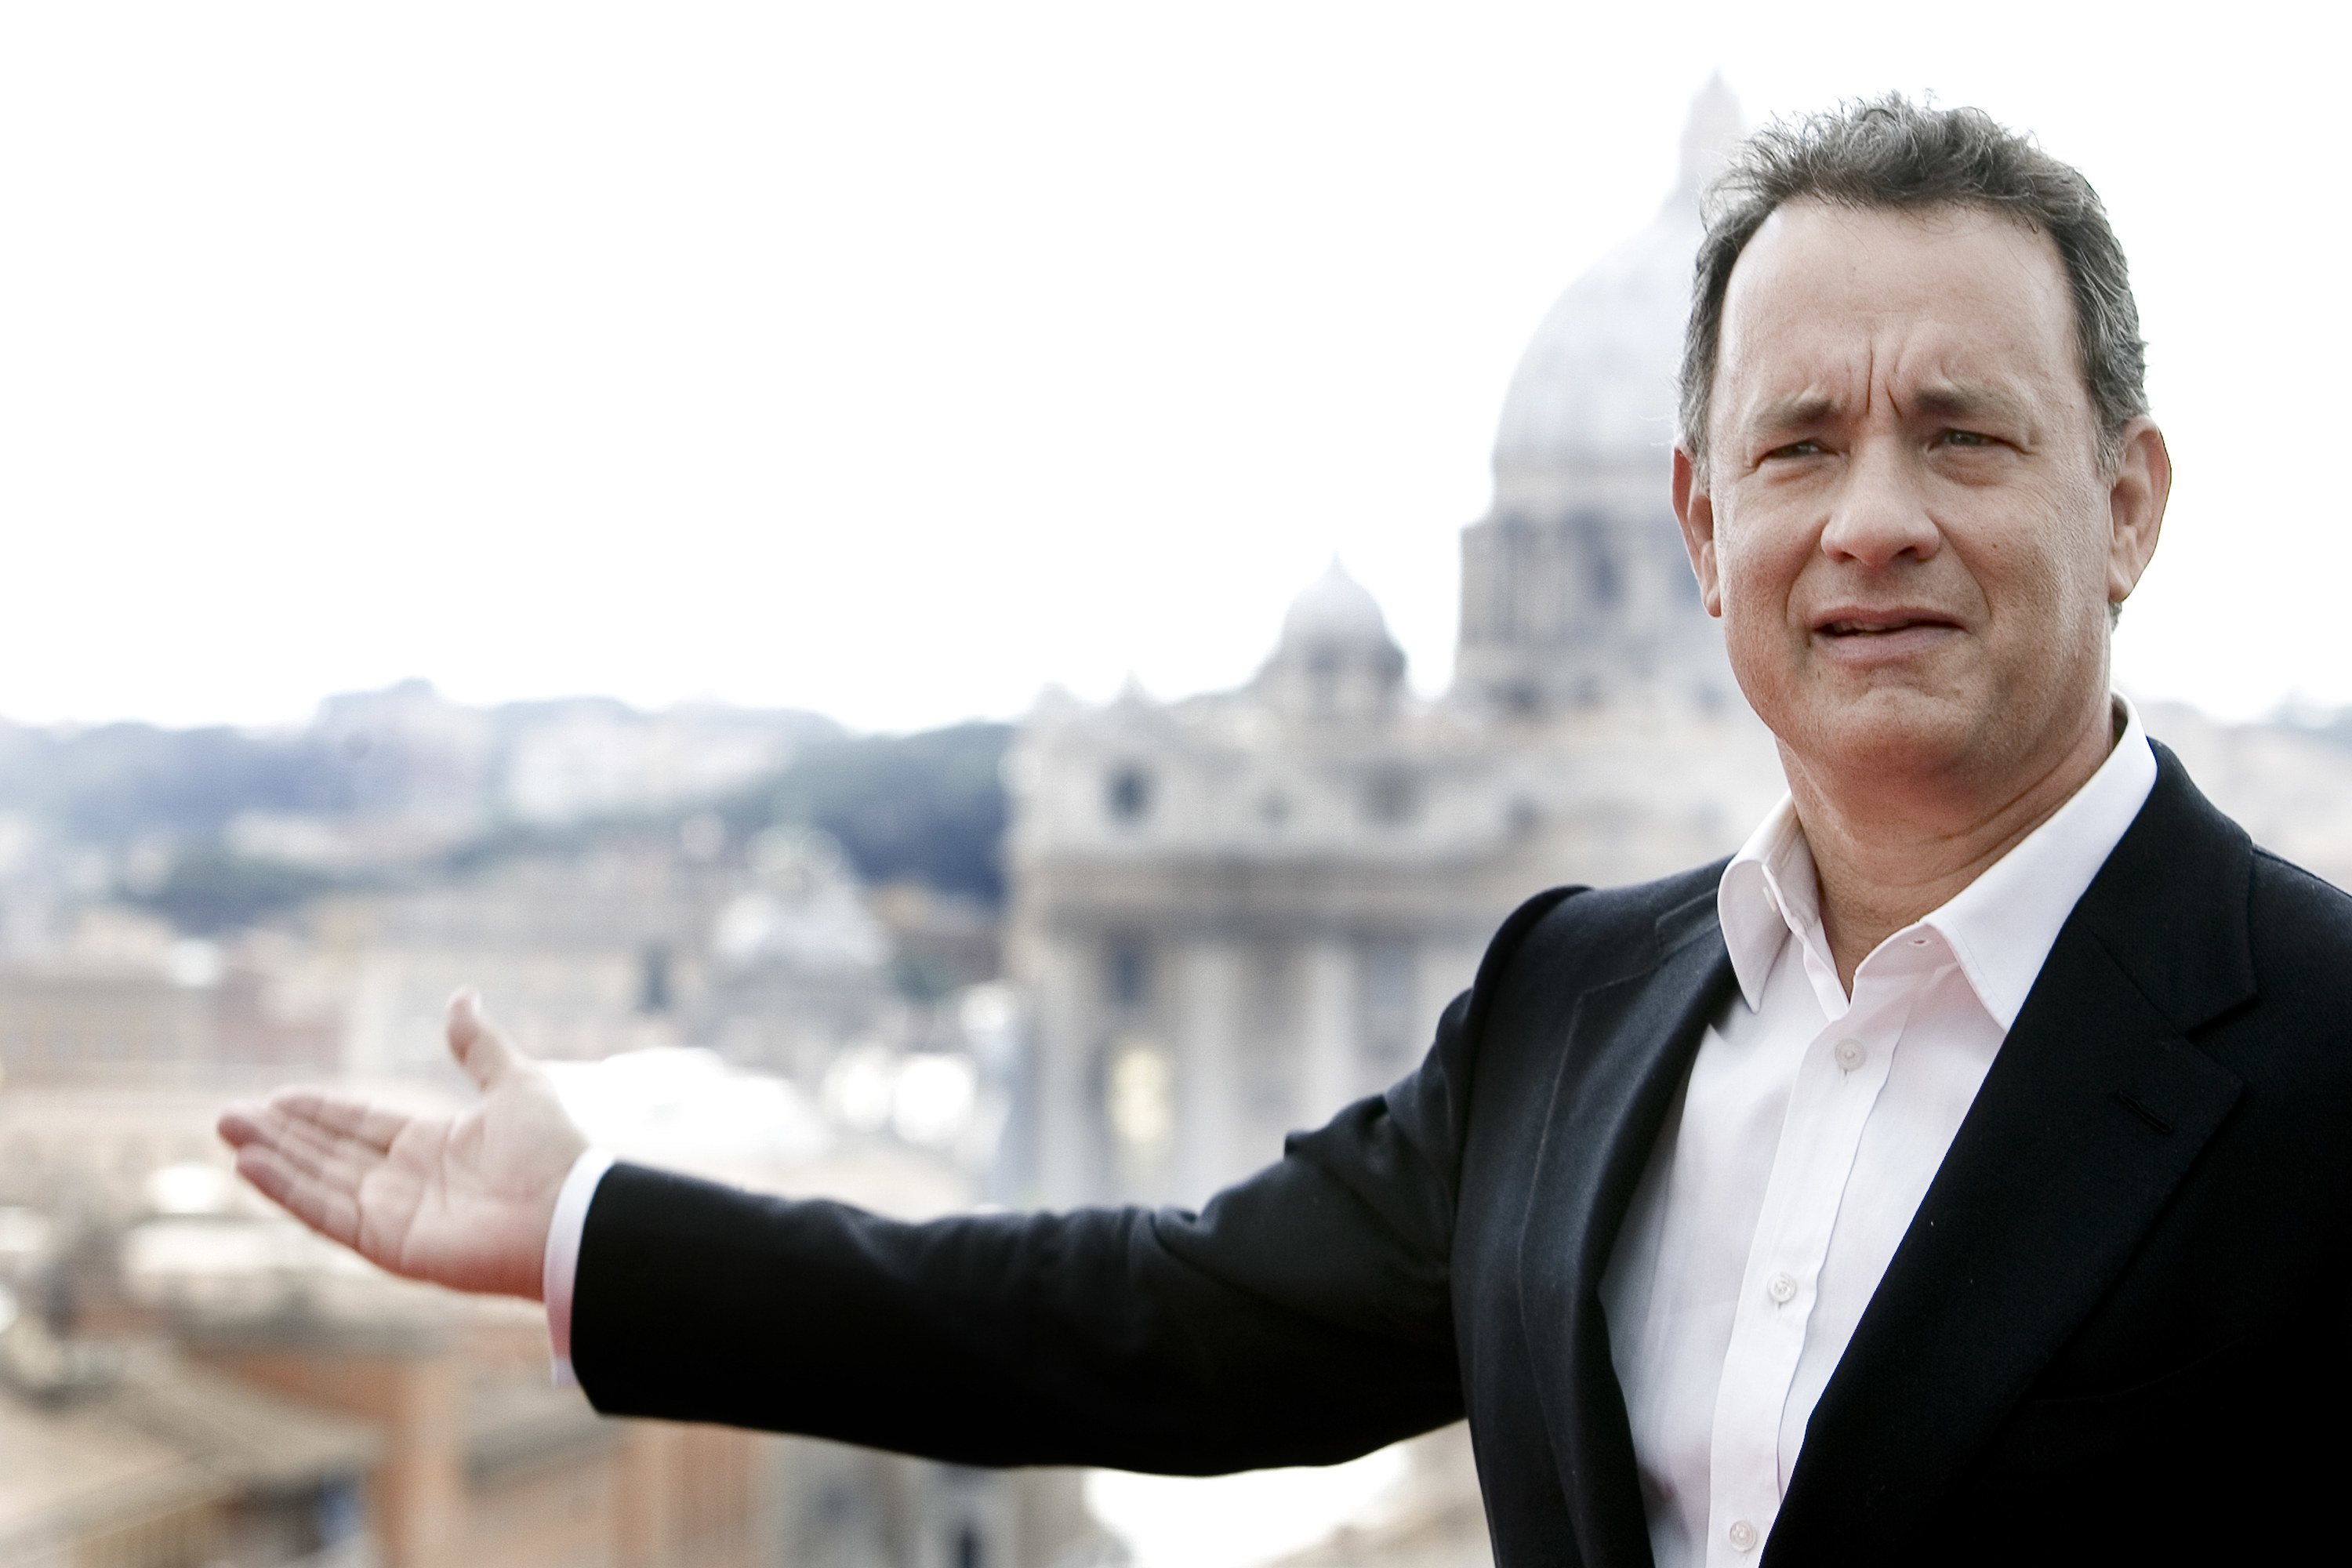 Tom gestures to the city of Rome behind him